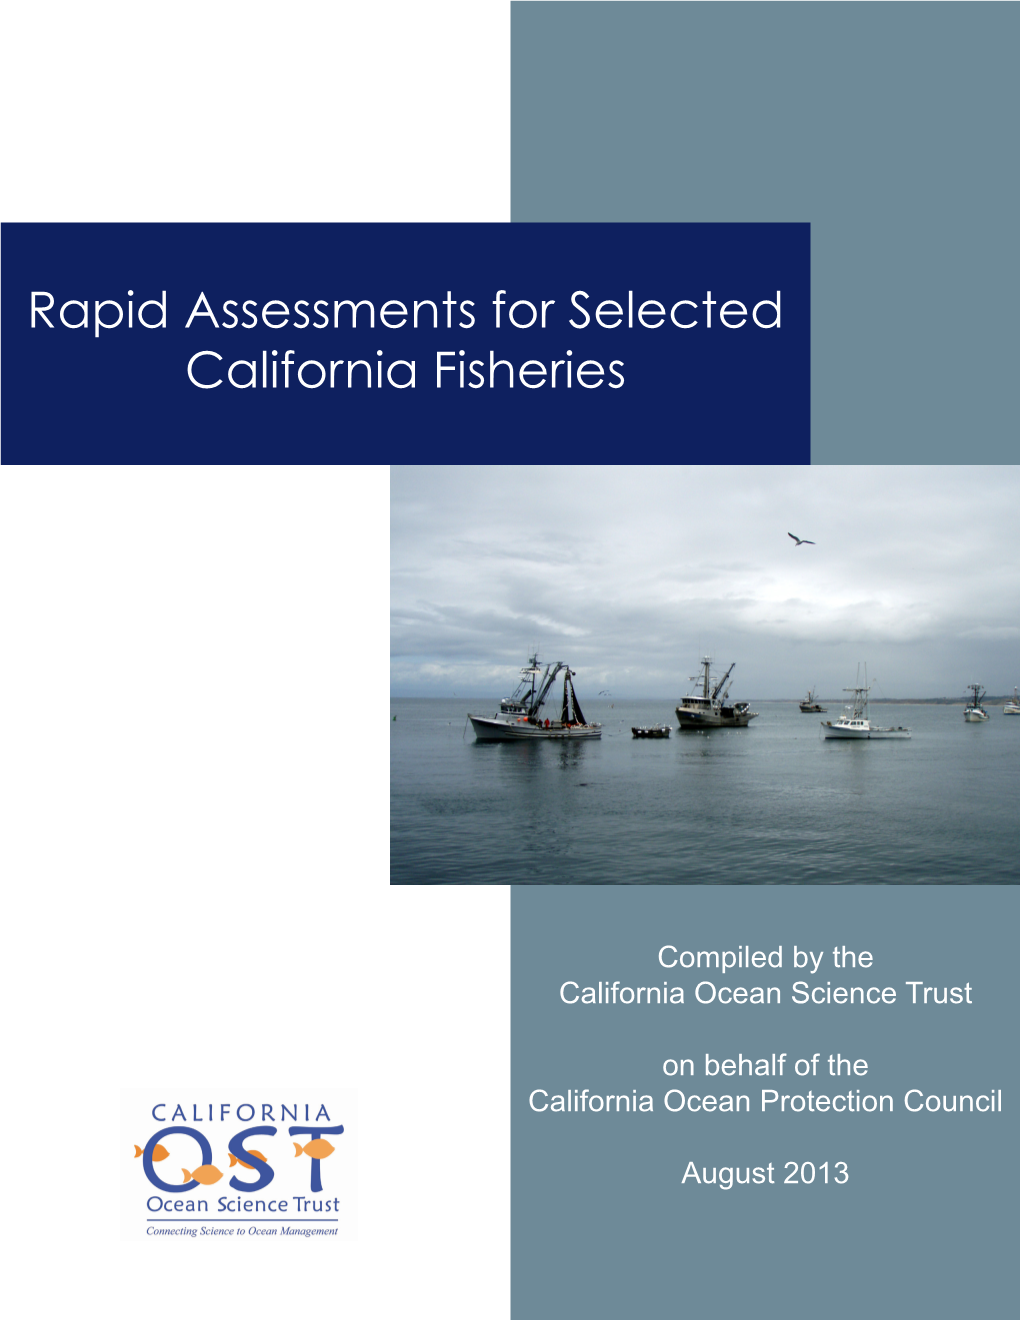 Rapid Assessments for Selected California Fisheries